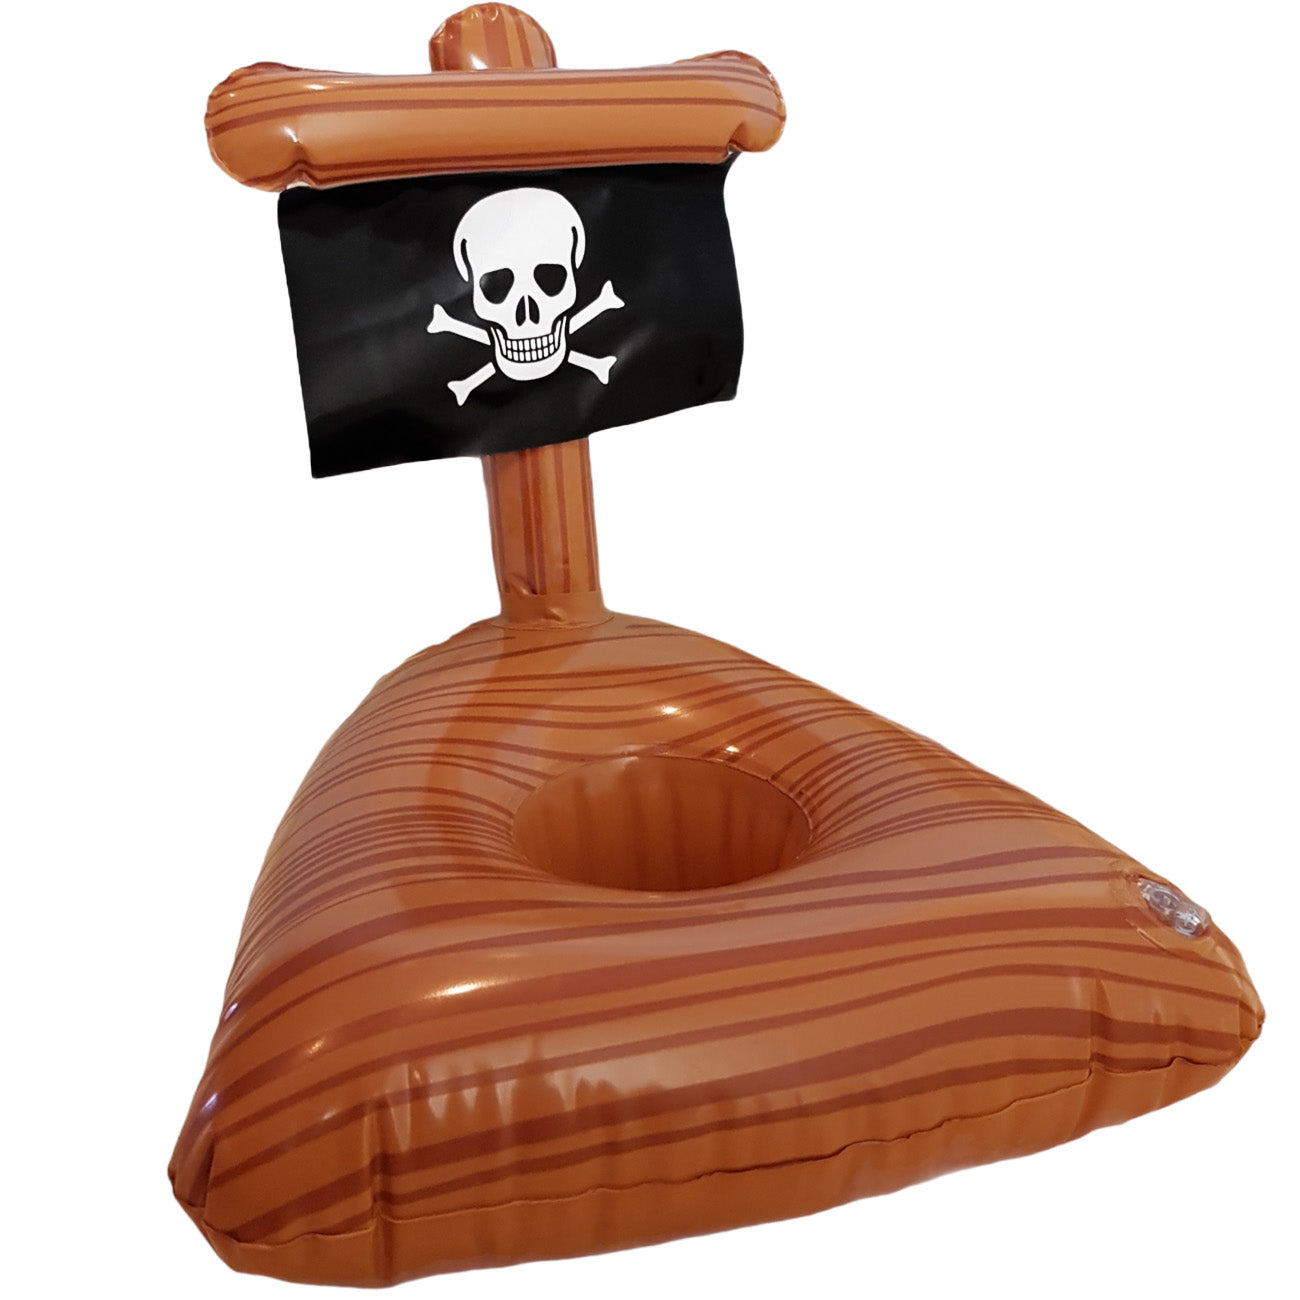 Miniature inflatable pirate ship for elf